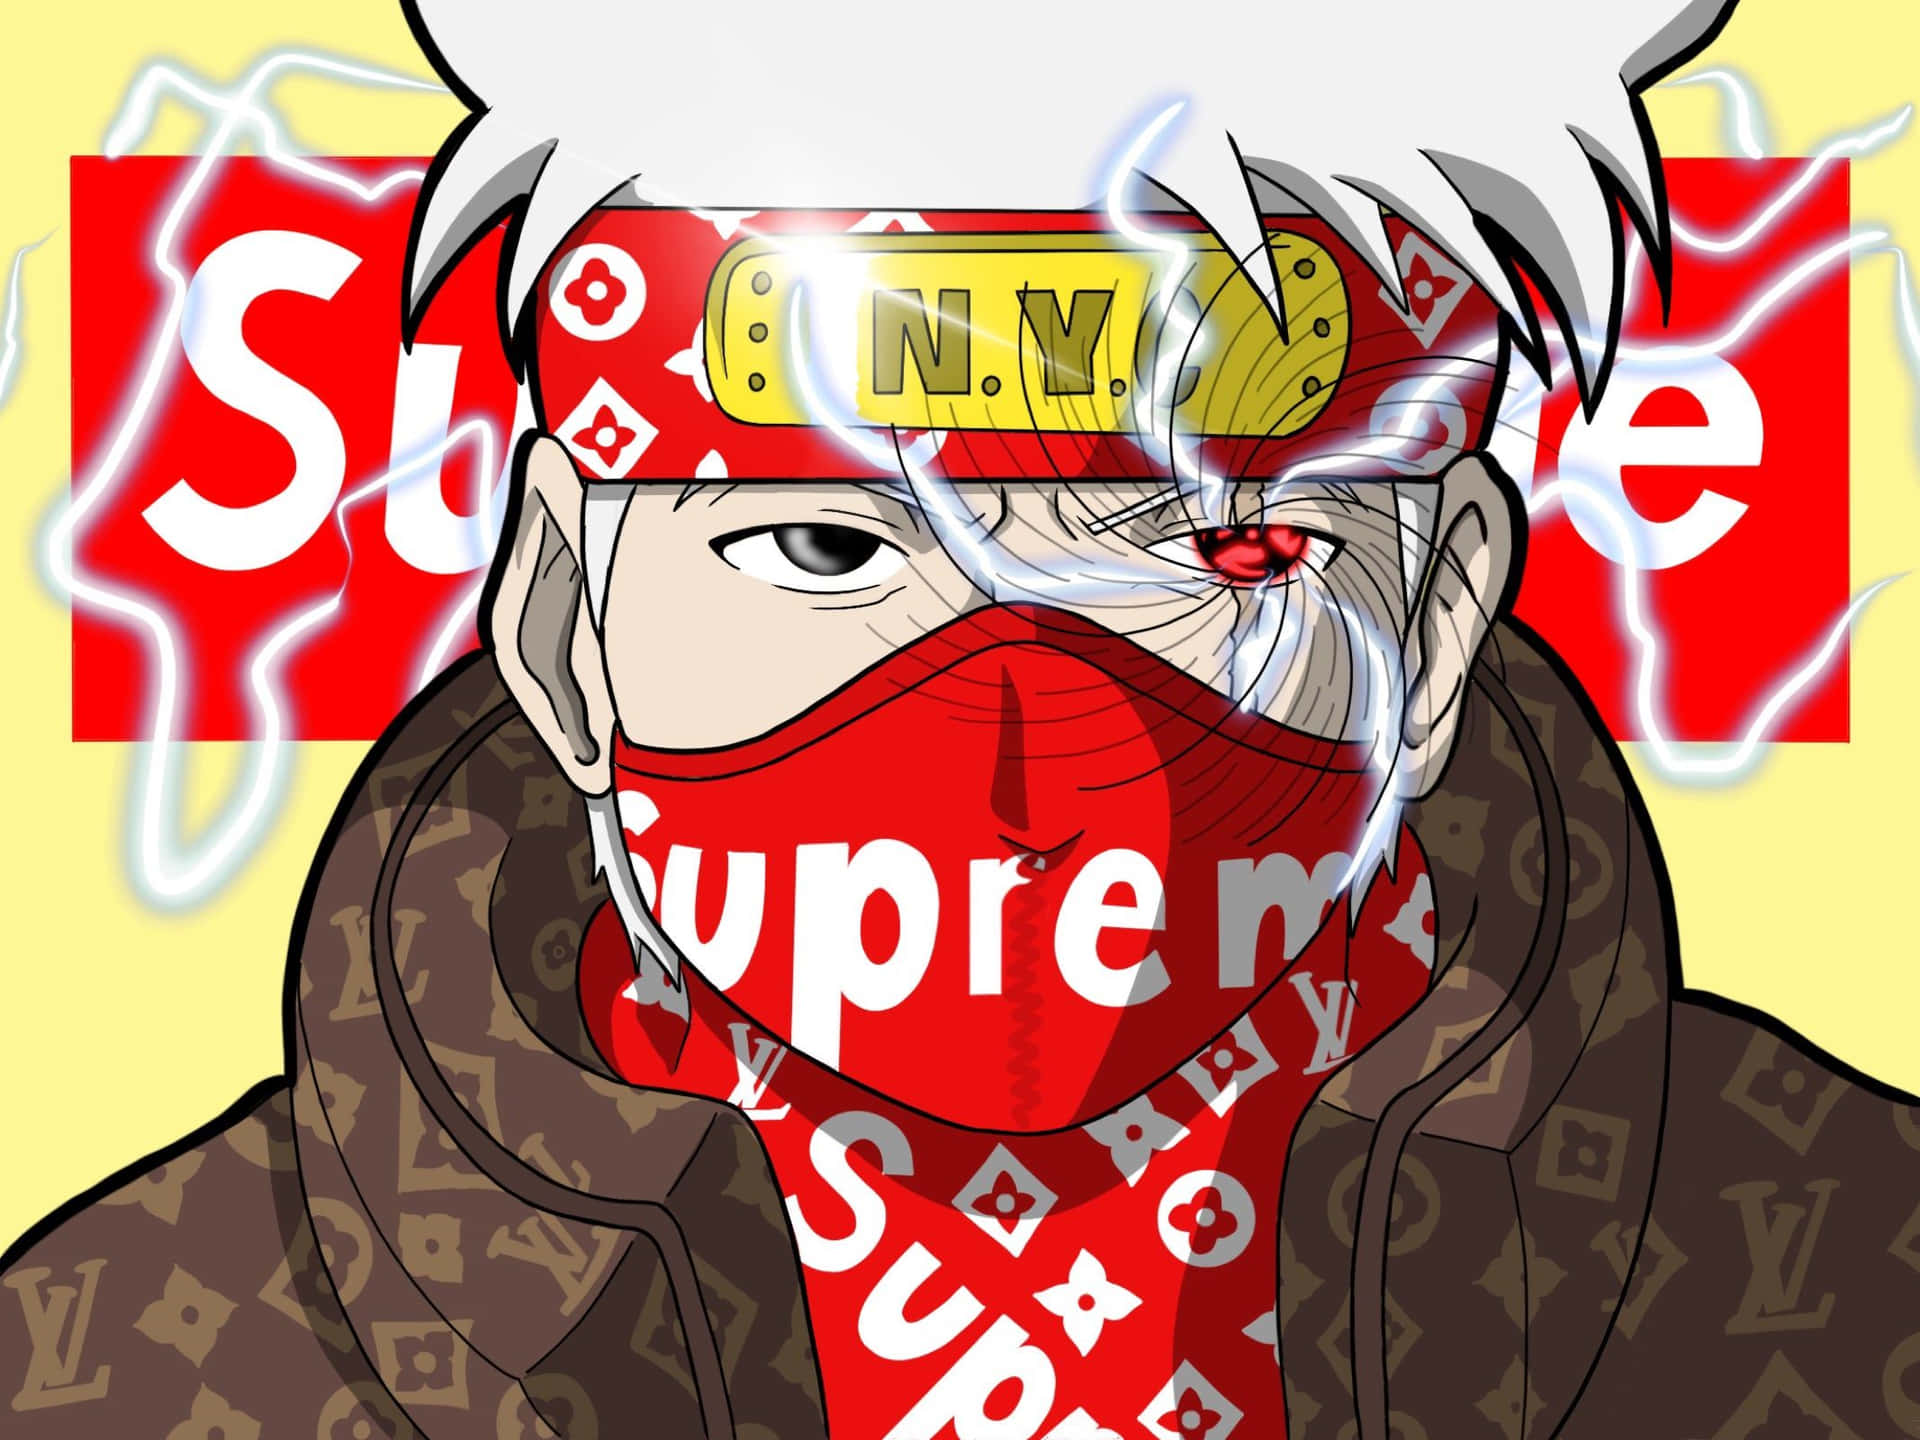 "Look Cool and Supreme in an Eye-Catching Outfit" Wallpaper